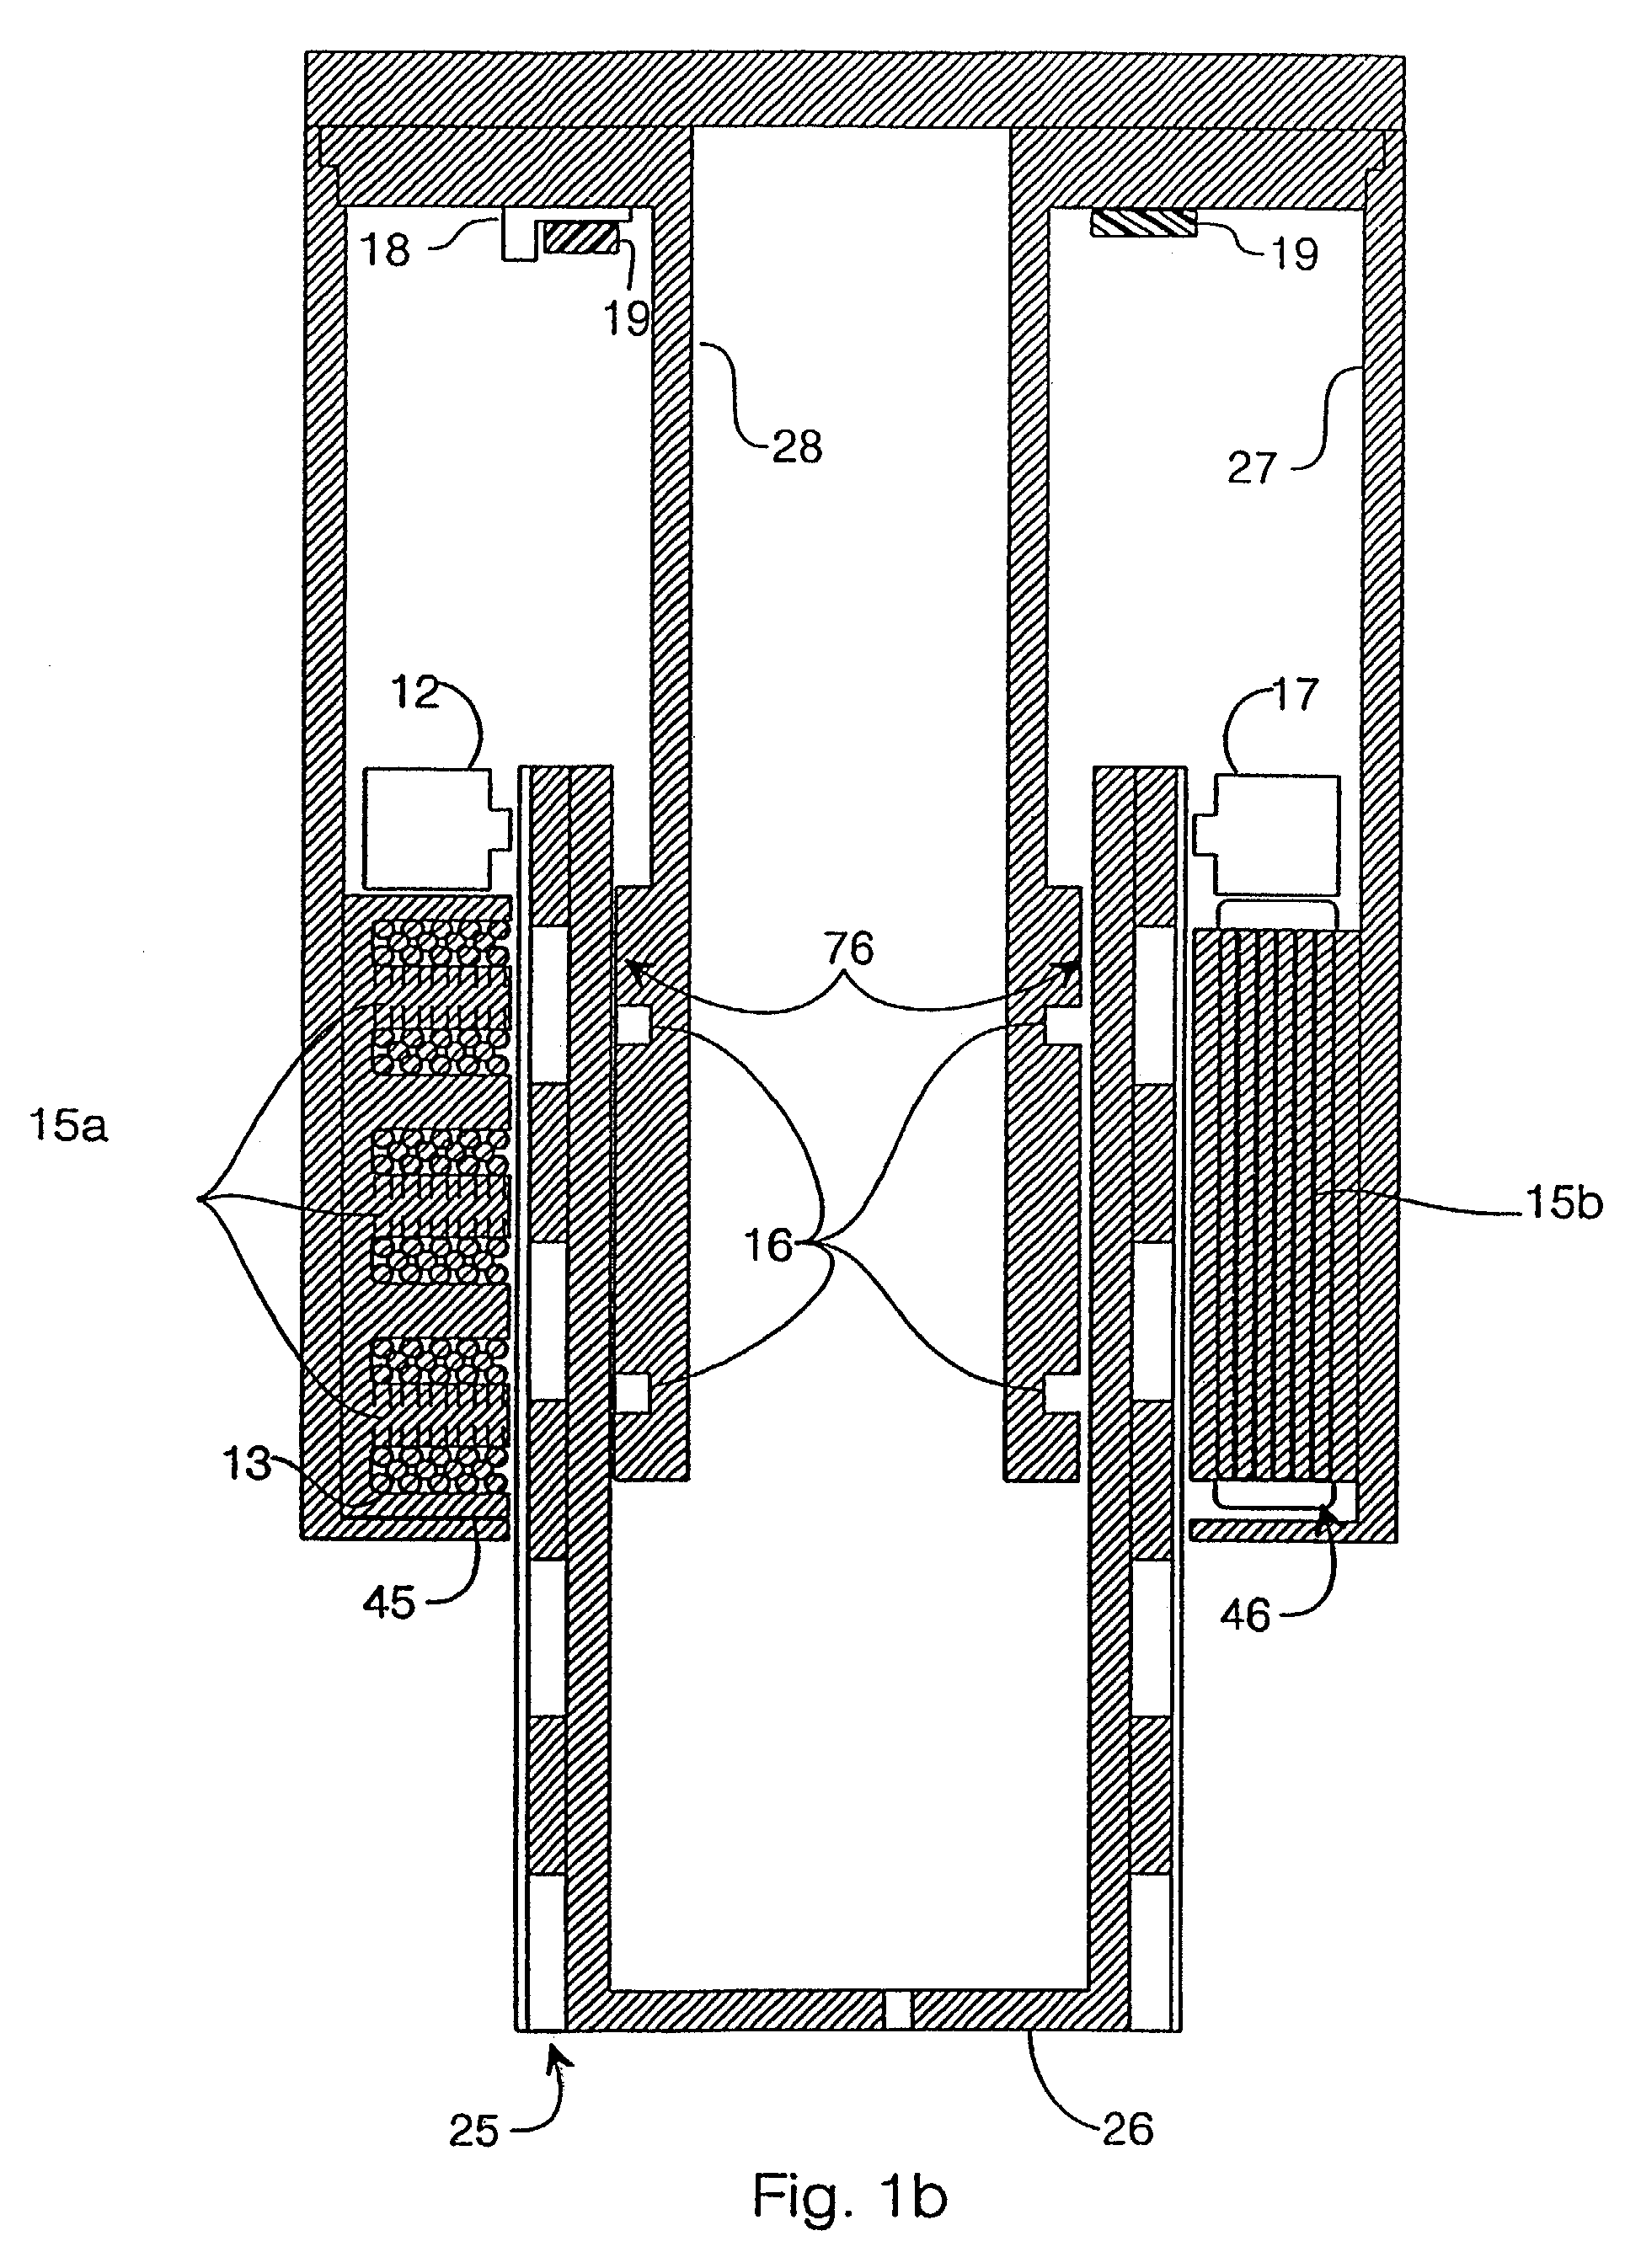 System and method to control a rotary-linear actuator